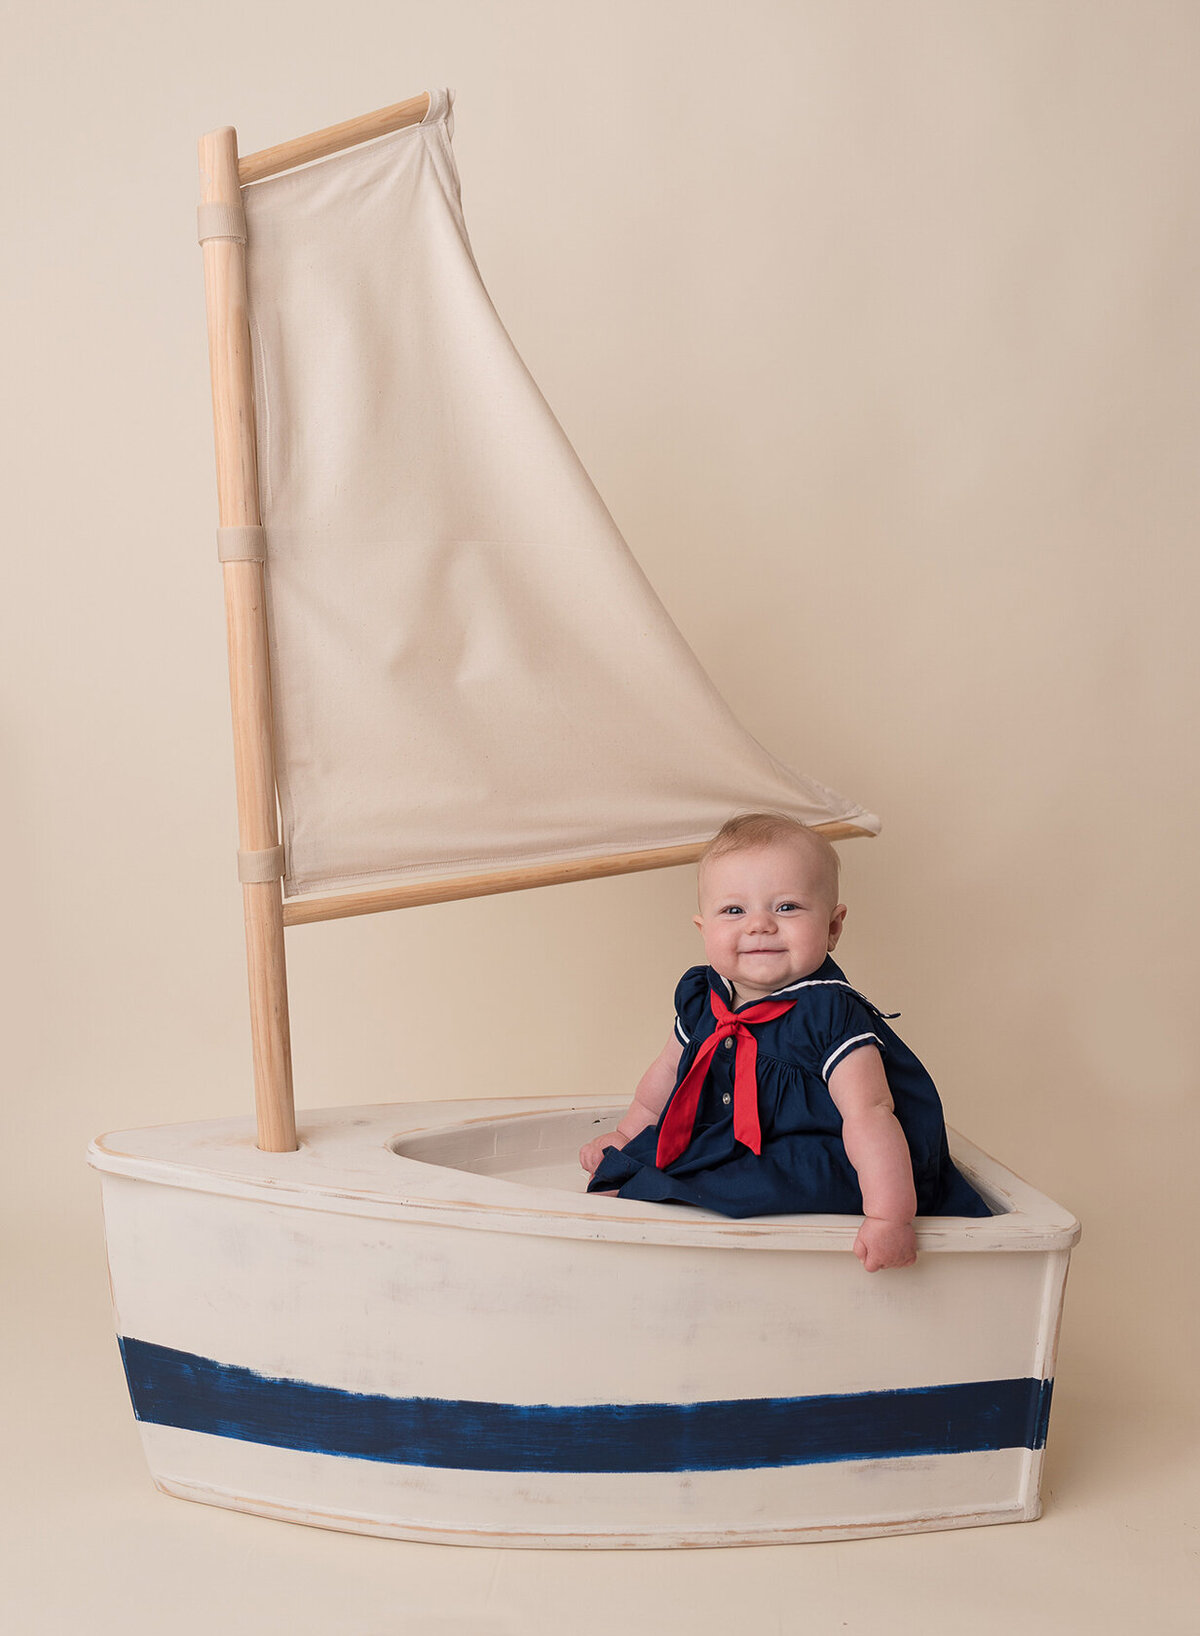 Cute Little baby photo in a creative boat